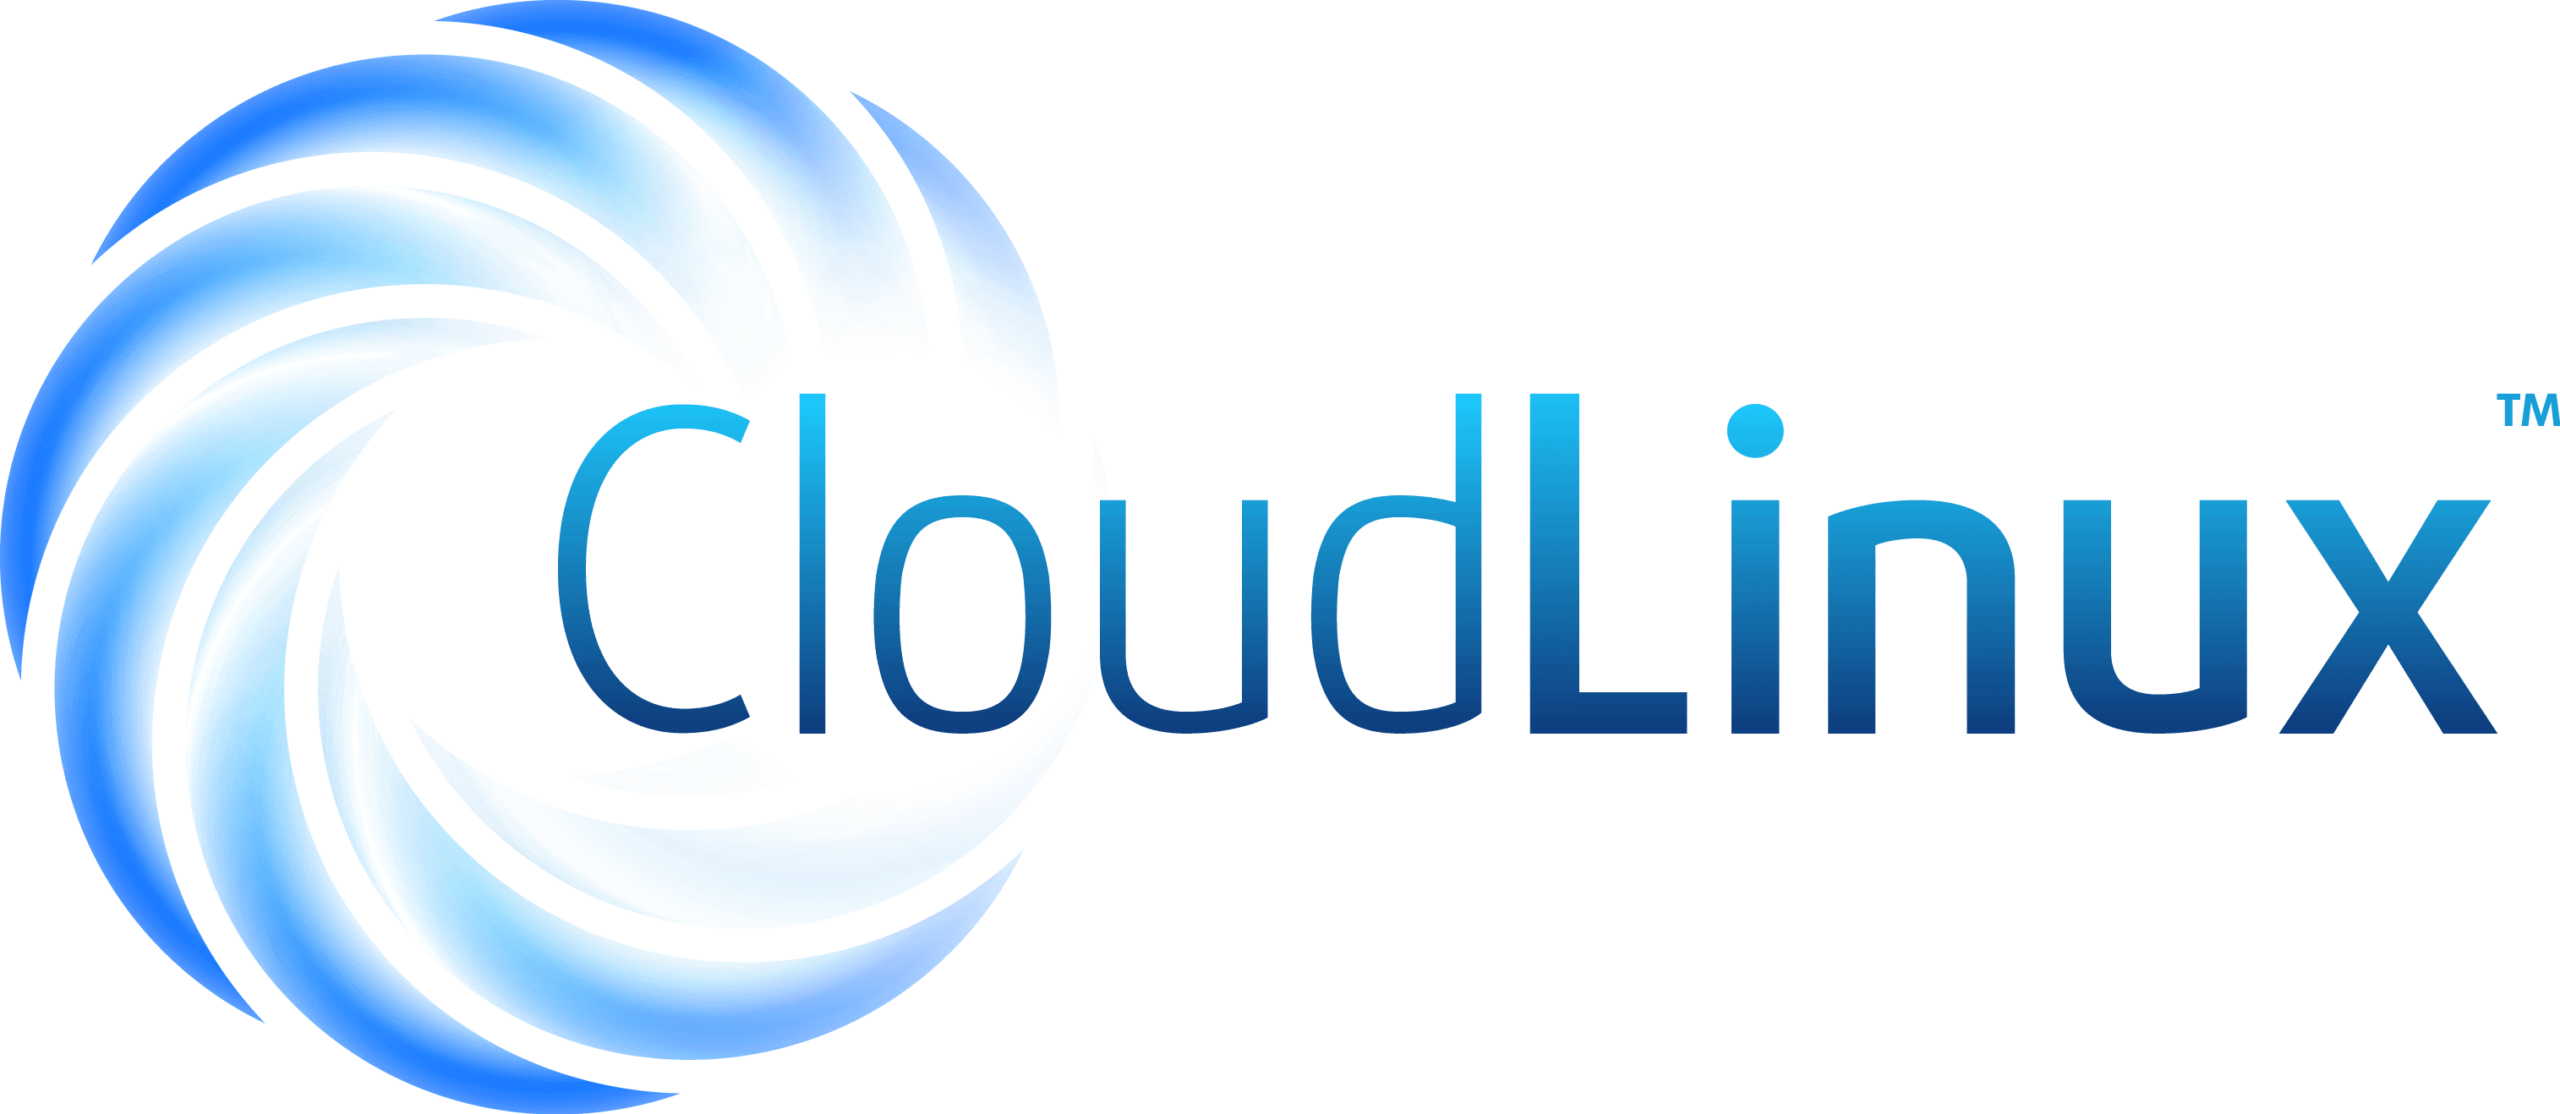 CloudLinux – A New Way we Ensure Rock Solid Reliability for Your Site